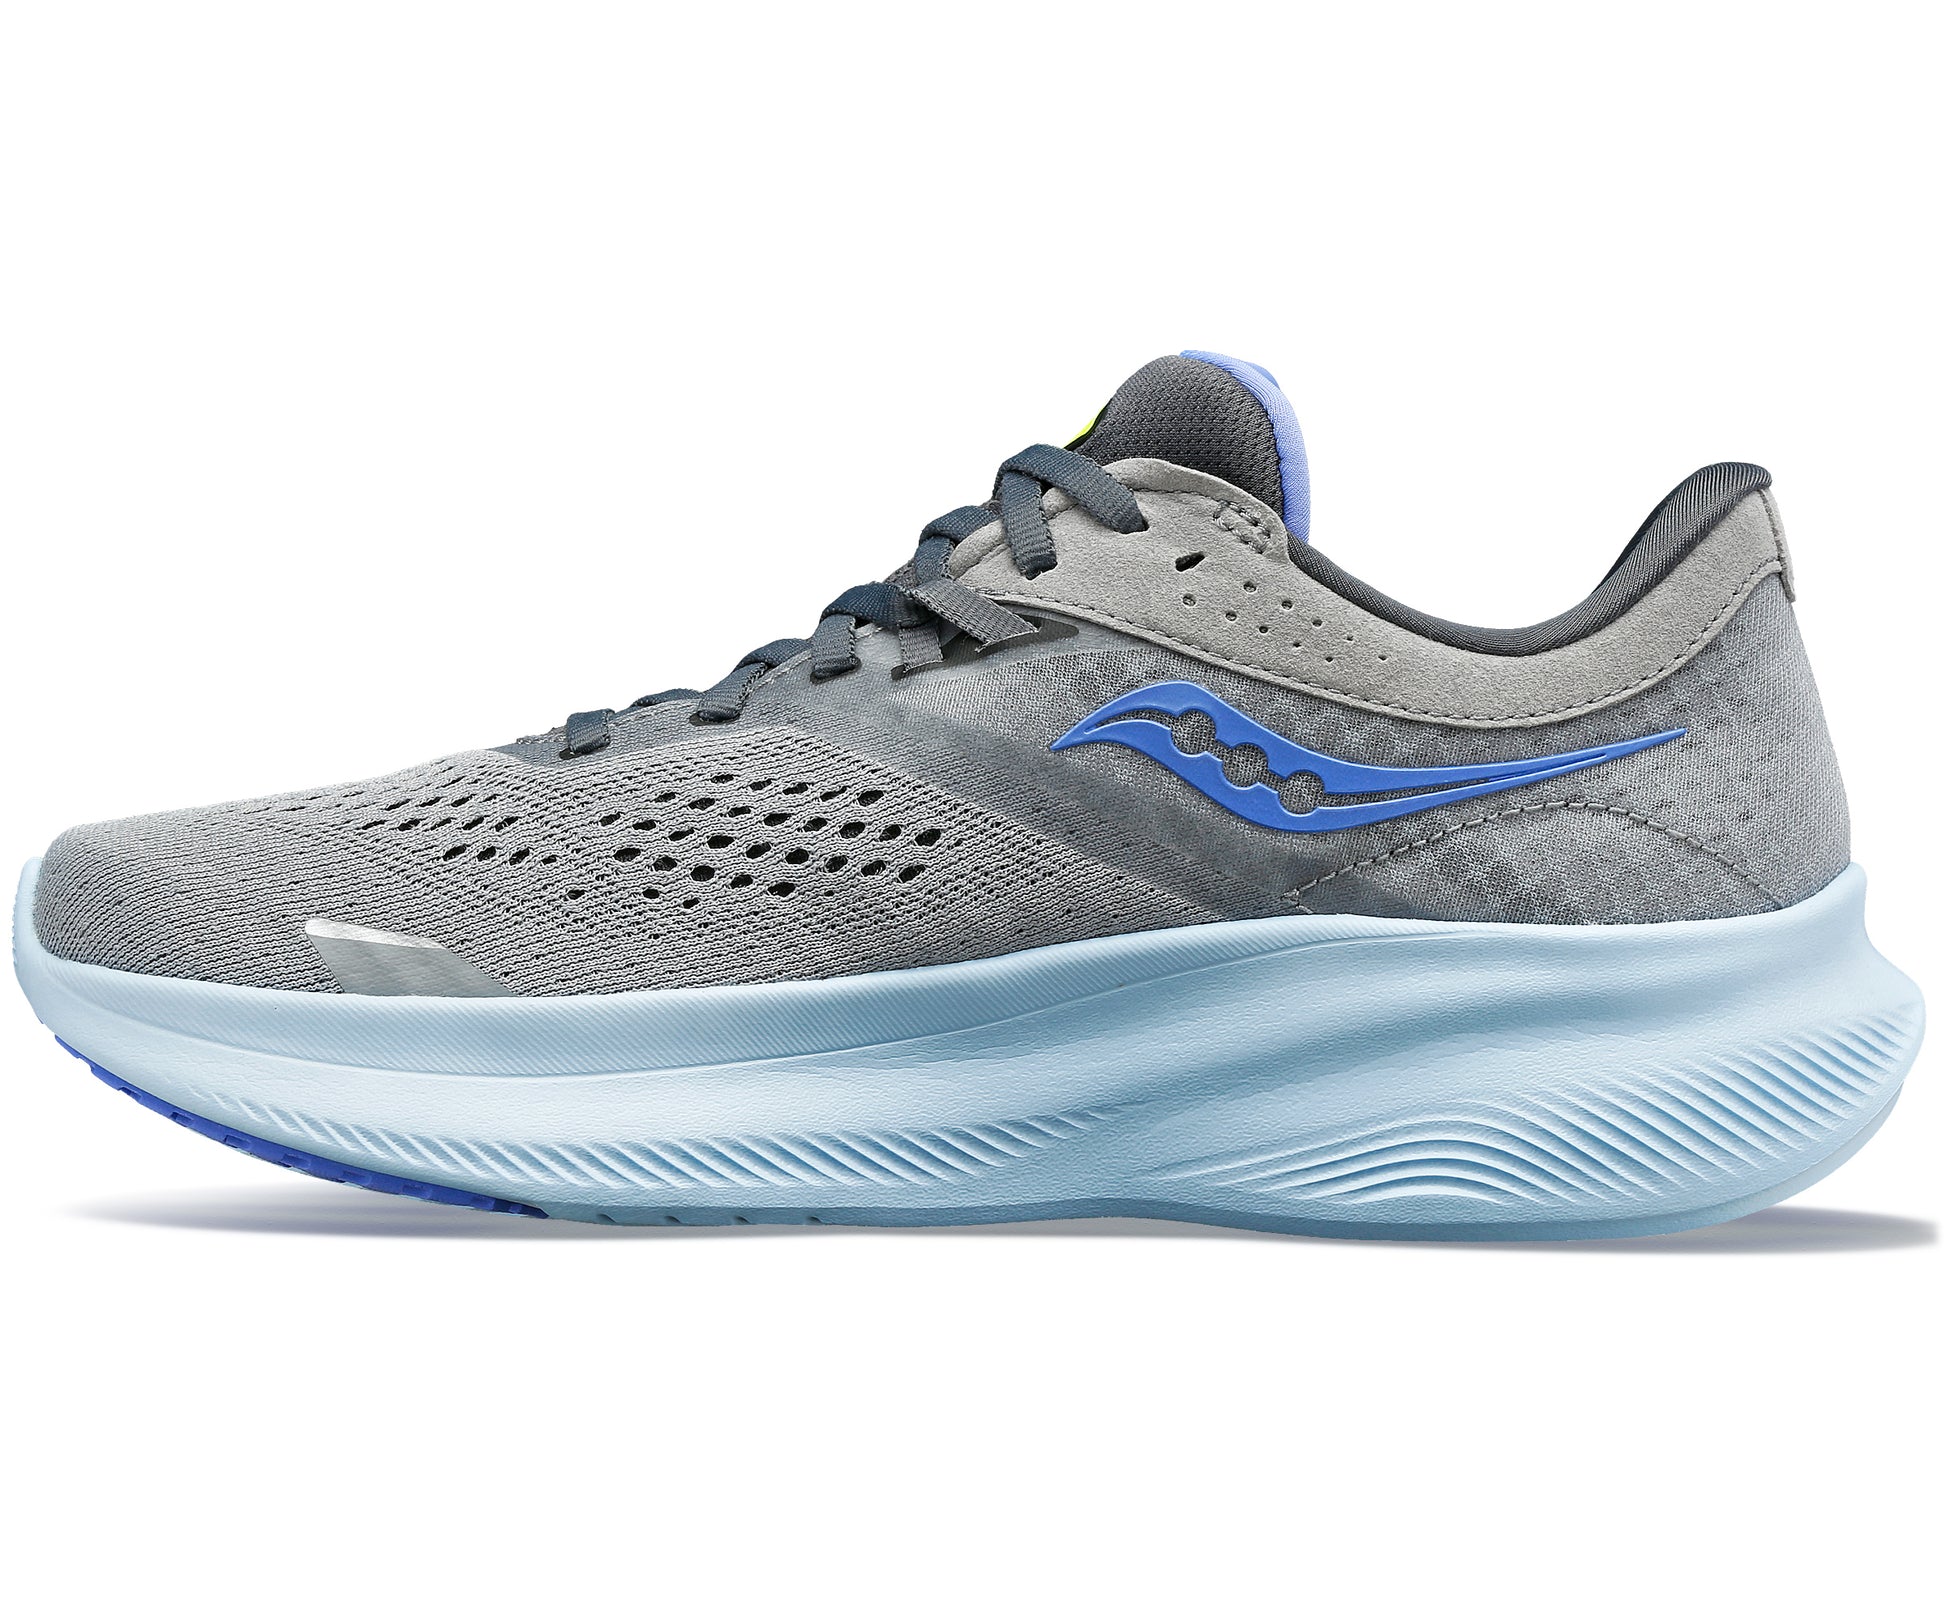 Saucony Ride 16 women's gray and blue stable neutral running shoe